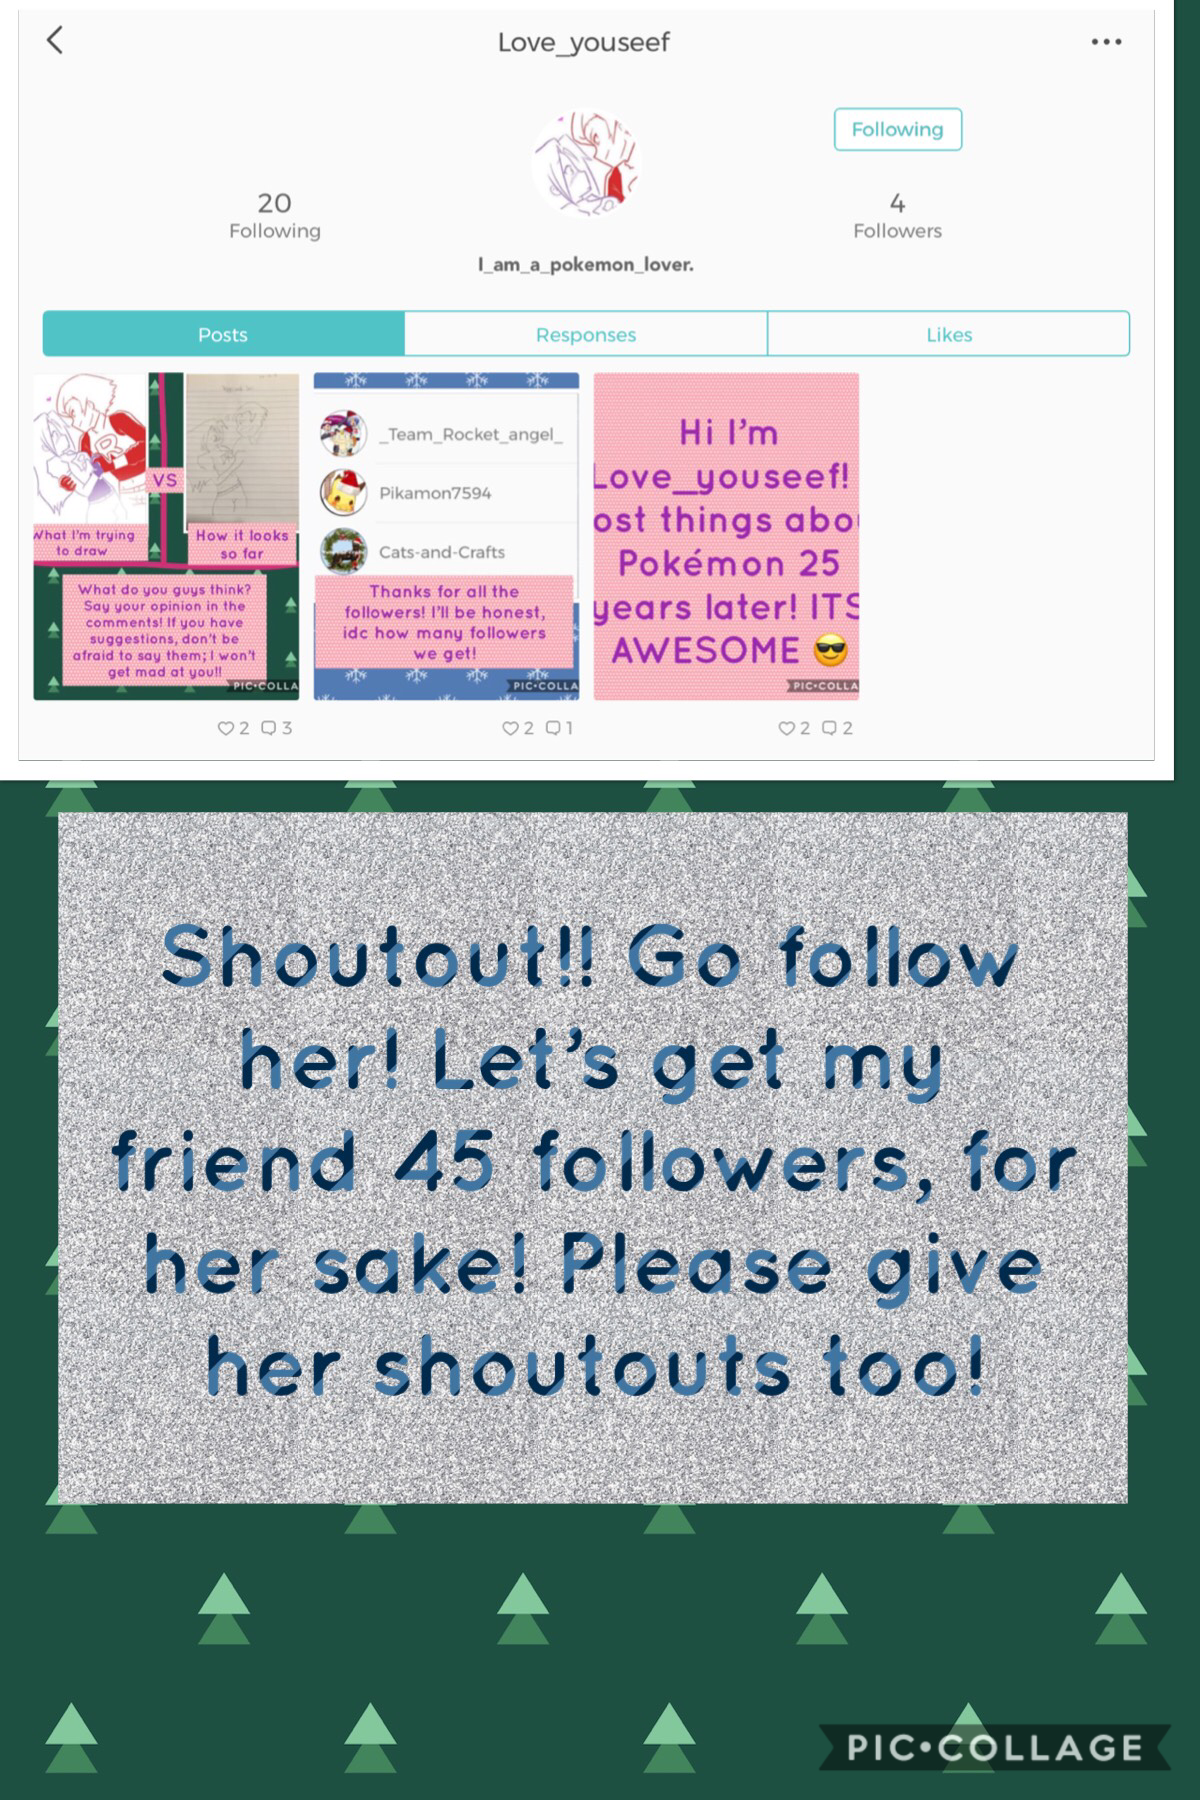 Give her some shoutouts!!